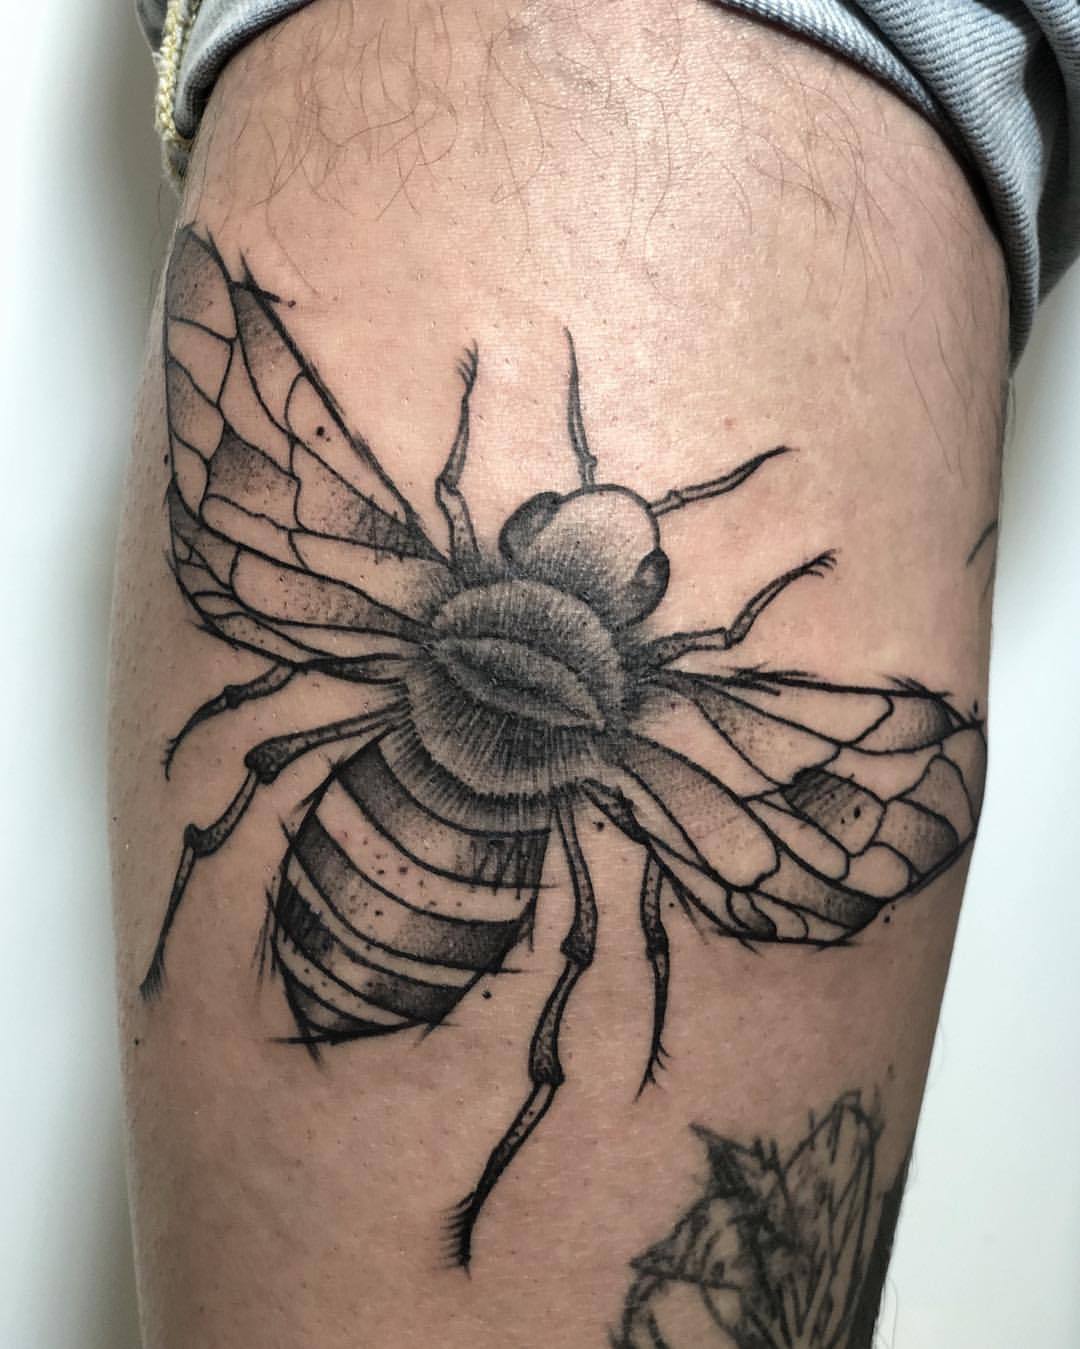 Bee from my flashbook to fill this gap on @roh.parker ✨ Thanks mate 💪🏼
.
.
.
#bee #benditatintaofficial #london #england #benditatinta #ontheroad #art #tattoo #collective #traditional #electric #tattooing #oldline #bold #blackworkers #goodvibes...